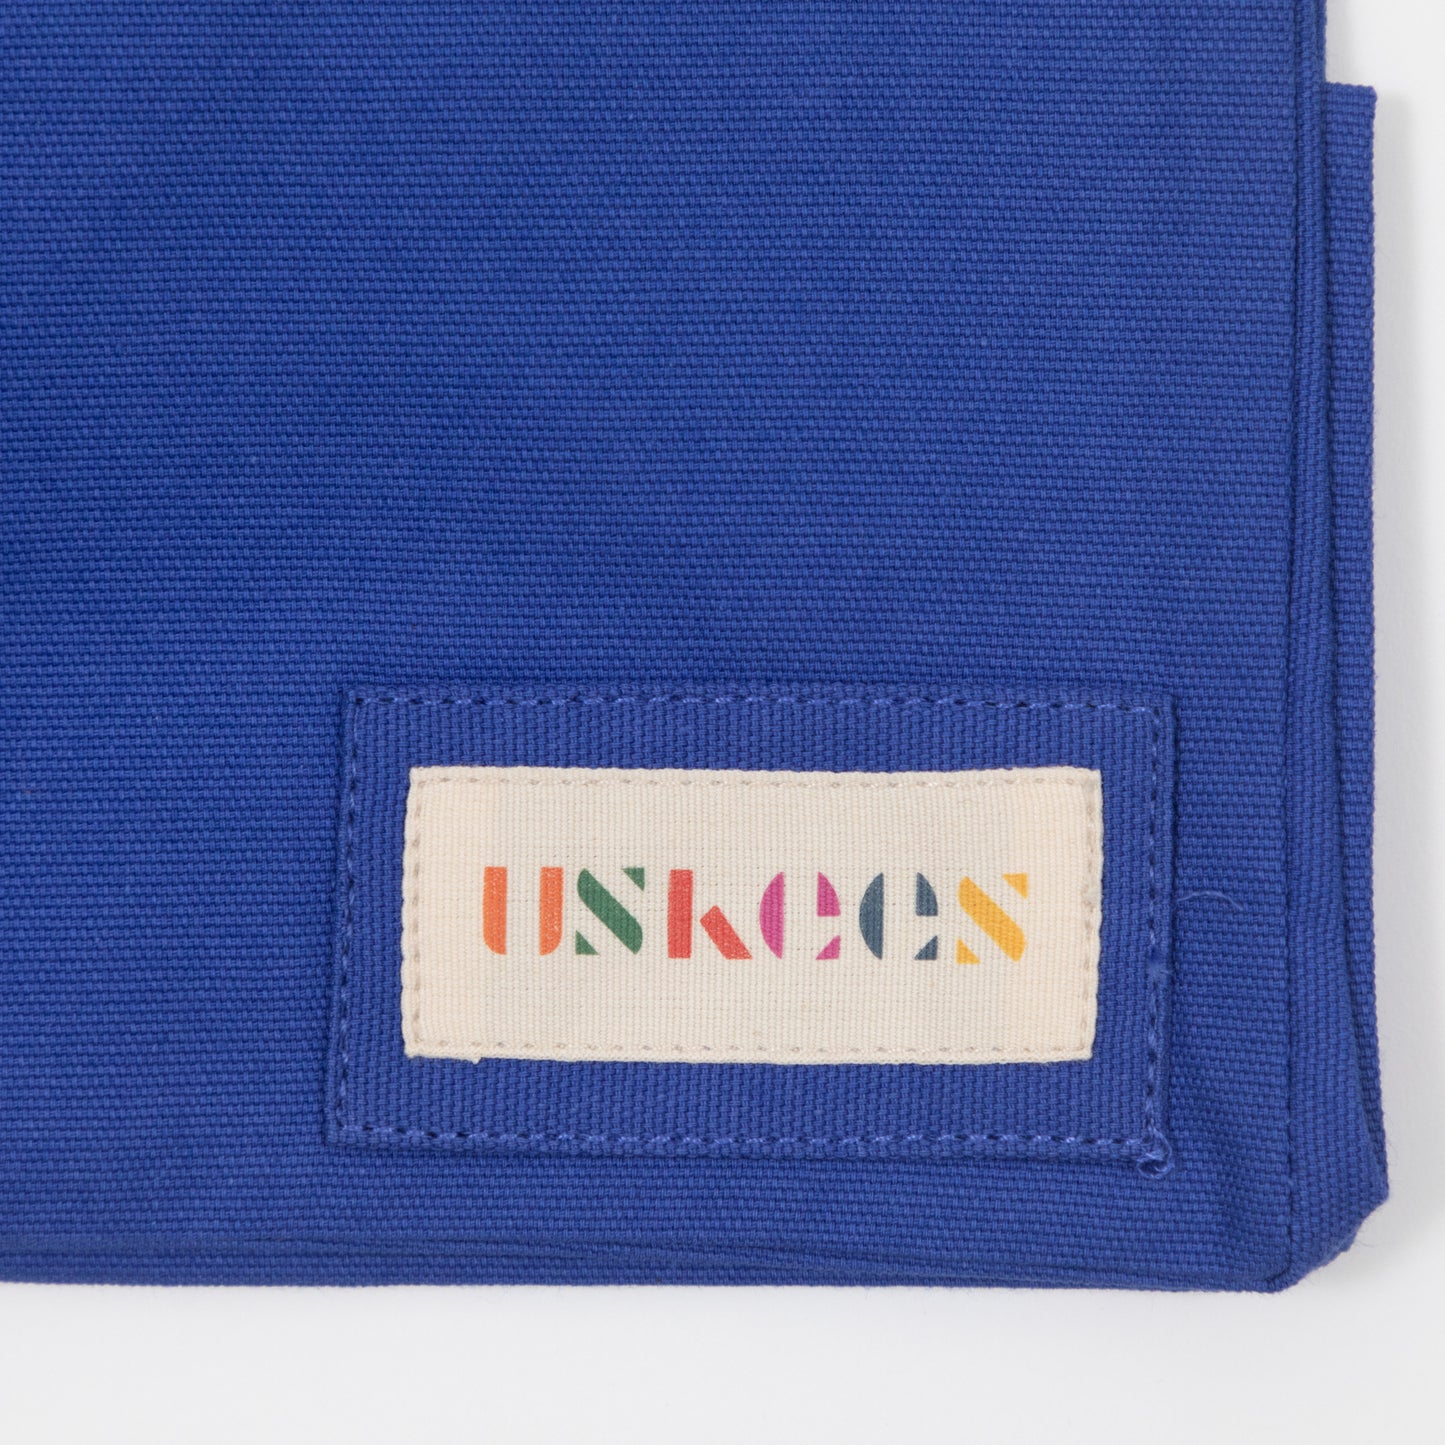 USKEES Small Organic Cotton Tote Bag in ULTRA-BLUE